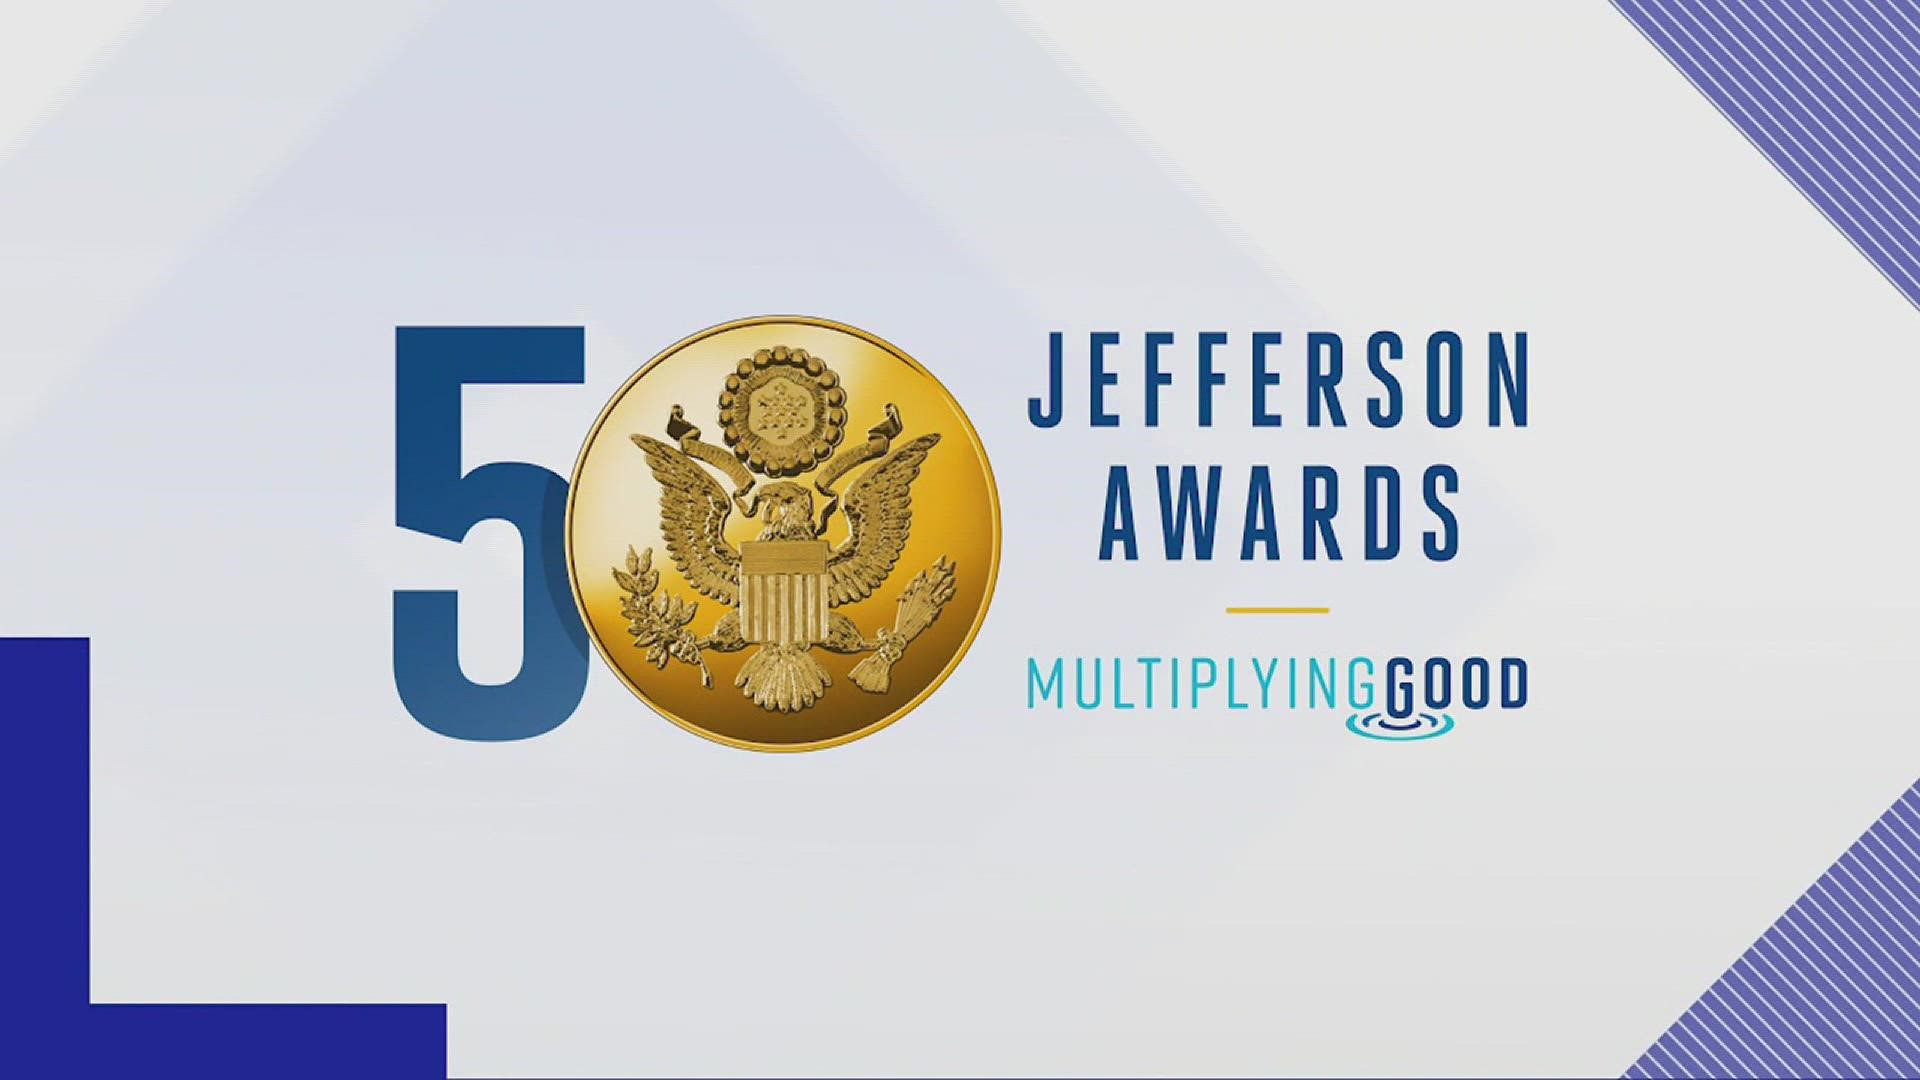 During the Jefferson Awards special, we'll introduce you to the people in our community making a difference and "multiplying good" in the Quad Cities.